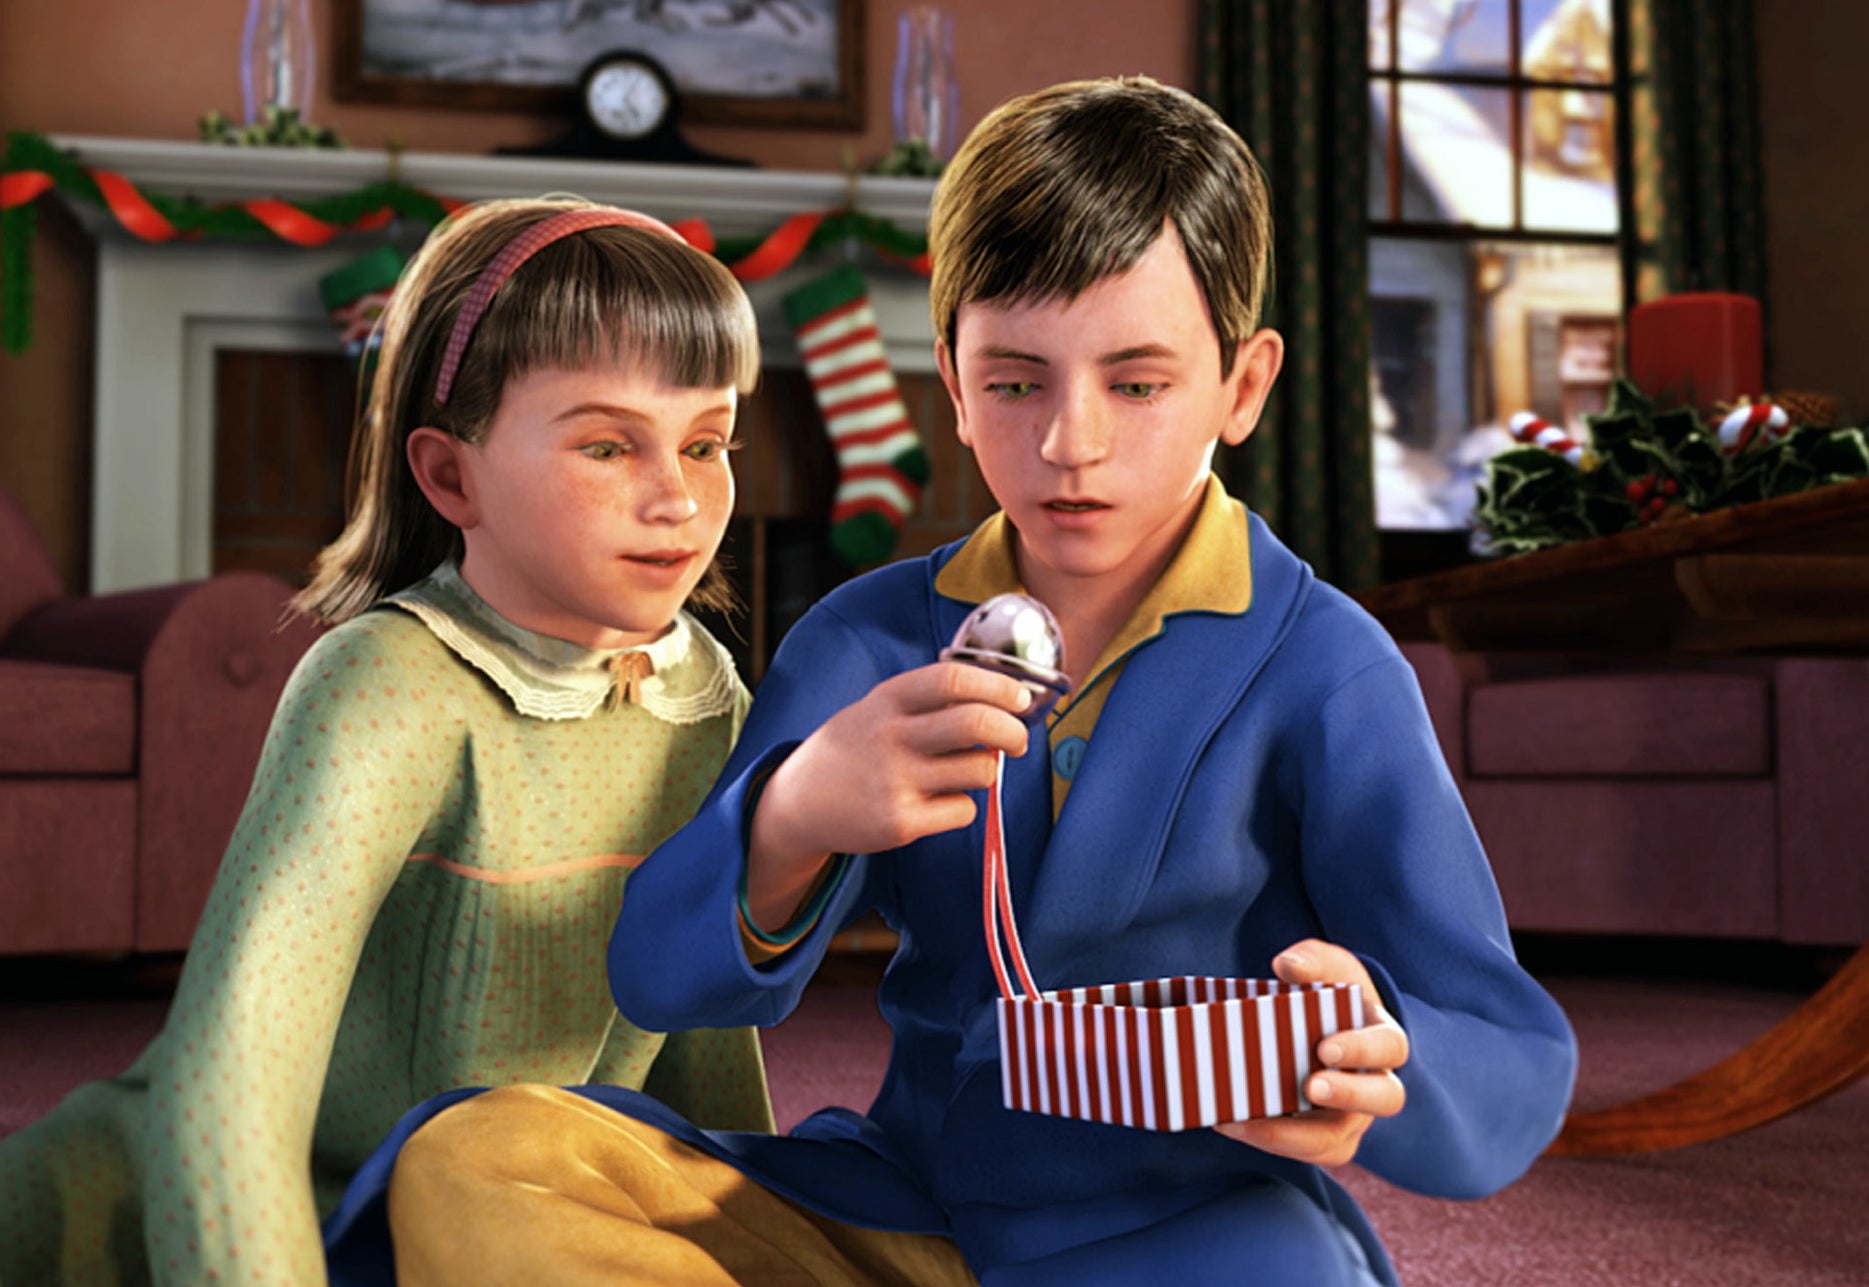 Two characters from &quot;The Polar Express&quot; open a gift box that has a bell